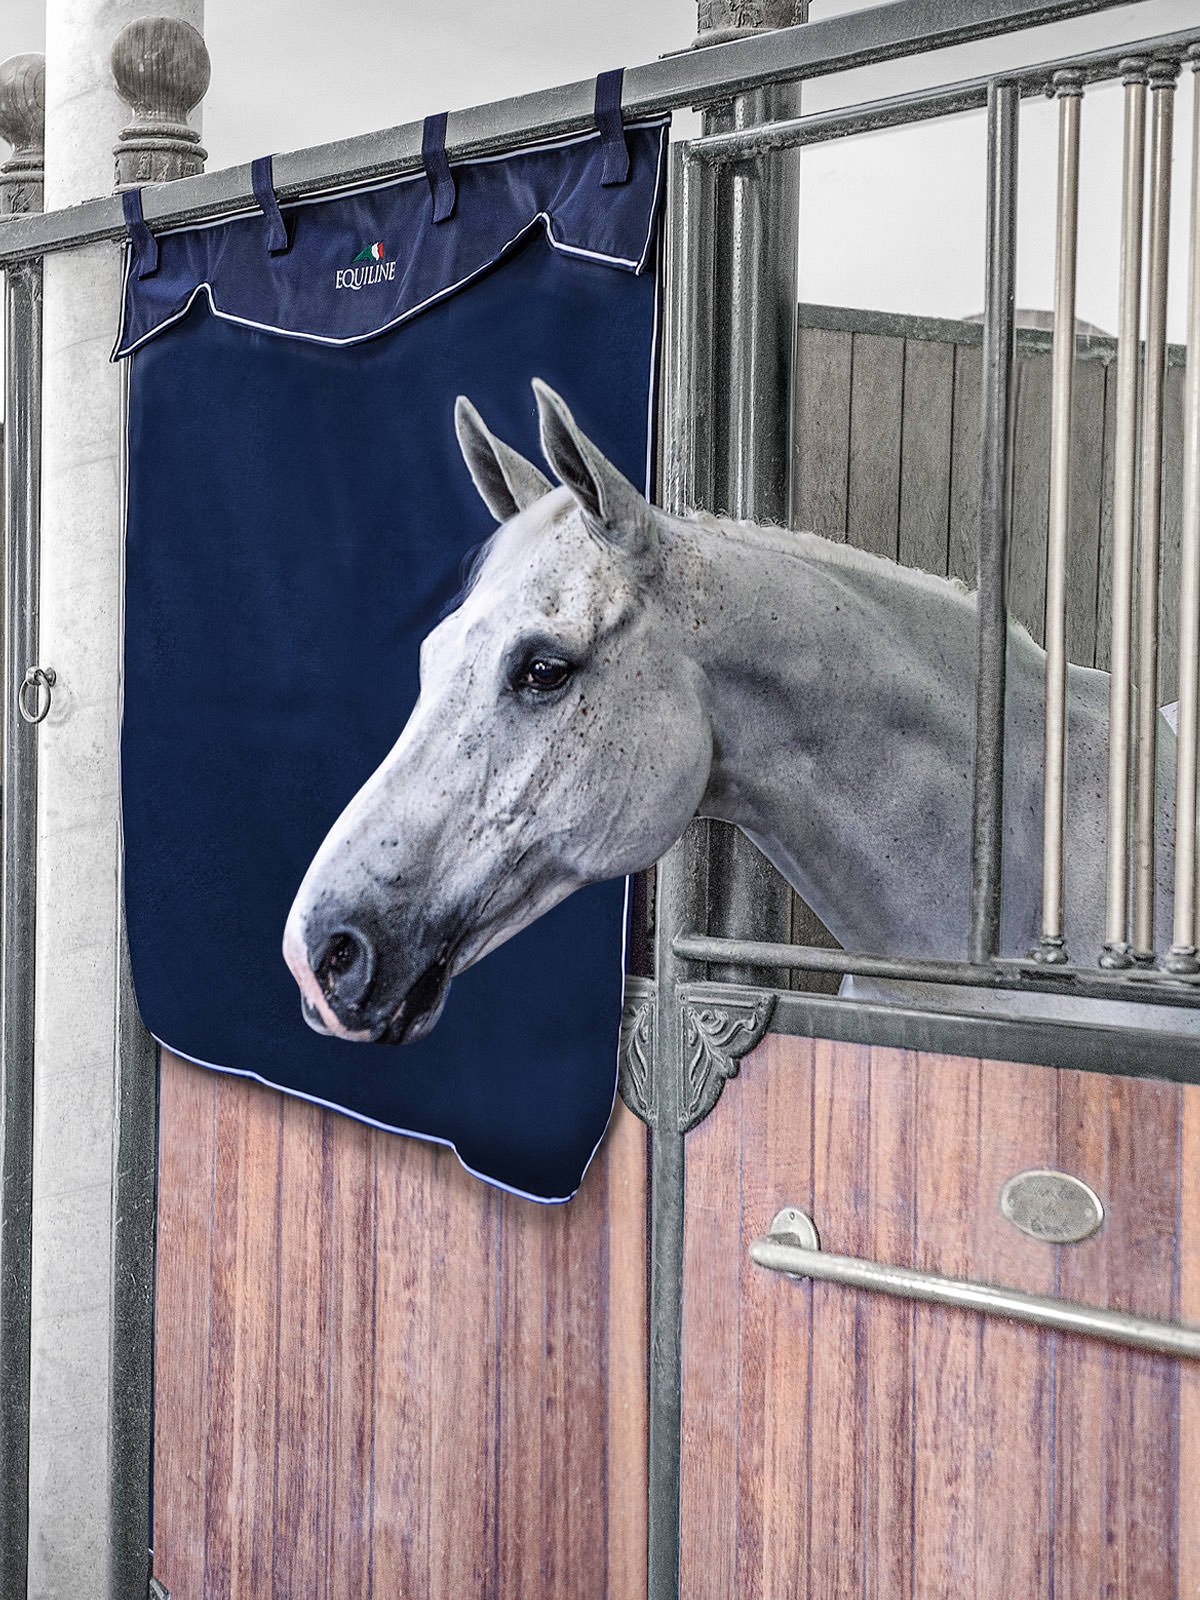 Equiline half stall curtain in navy blue